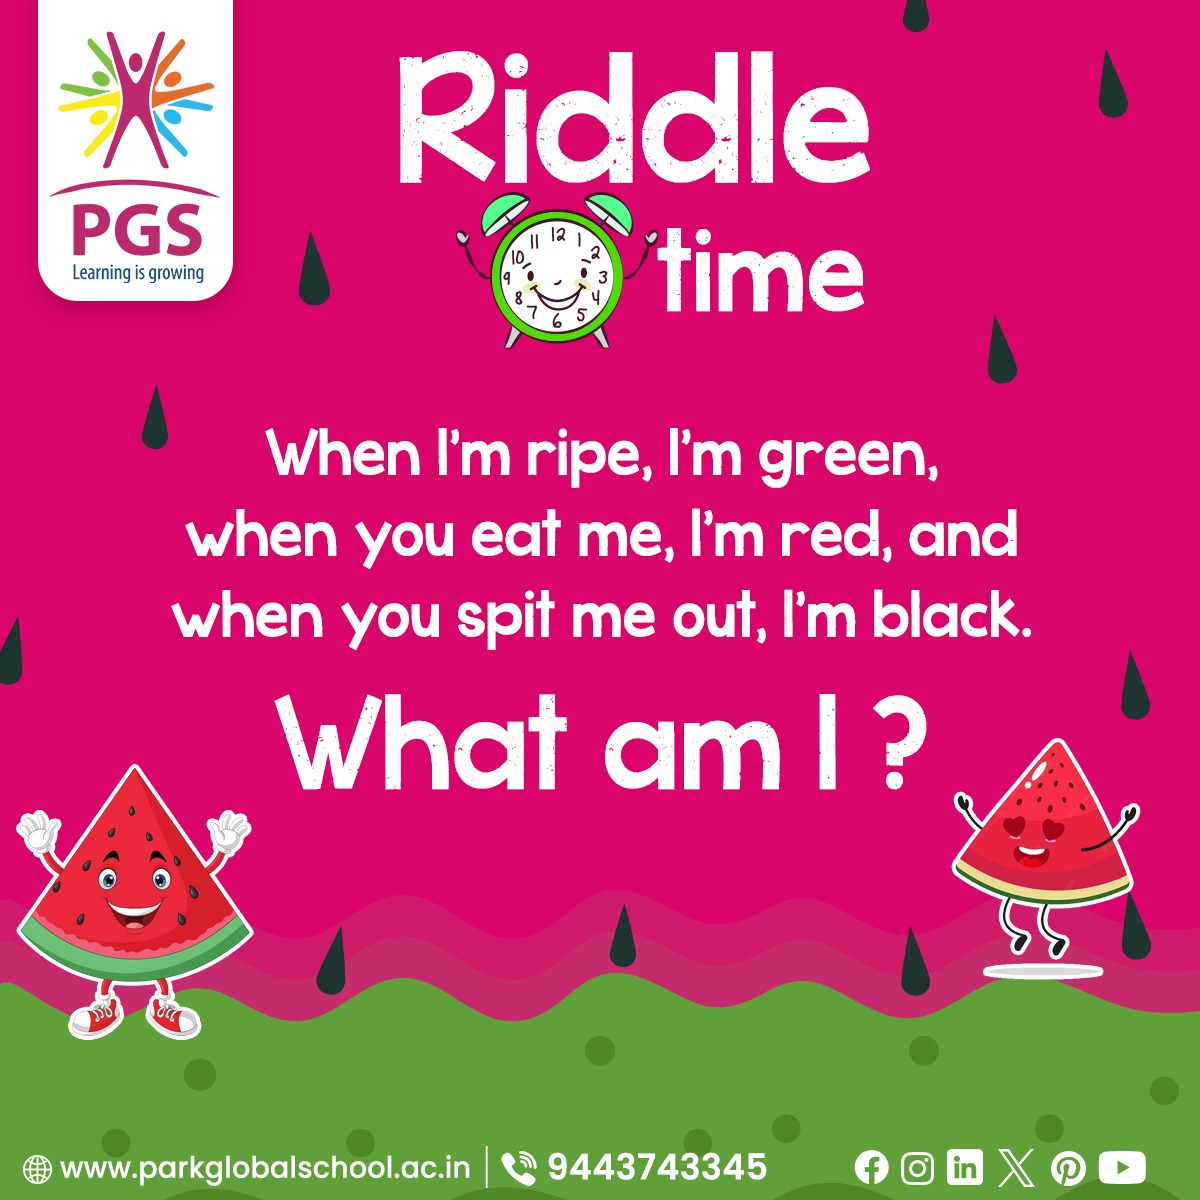 Weekend Riddle!

Can you unravel this brainteaser? 

Drop your responses in the comments!

#Parkglobalschool #PGS #RiddleTime #BestcbseschoolinCoimbatore #WeekendQuiz #RiddleFun #funlearning #BrainGames #learning #learningthroughplay #RiddleMasters #riddles #quiz #AnswerChallenge